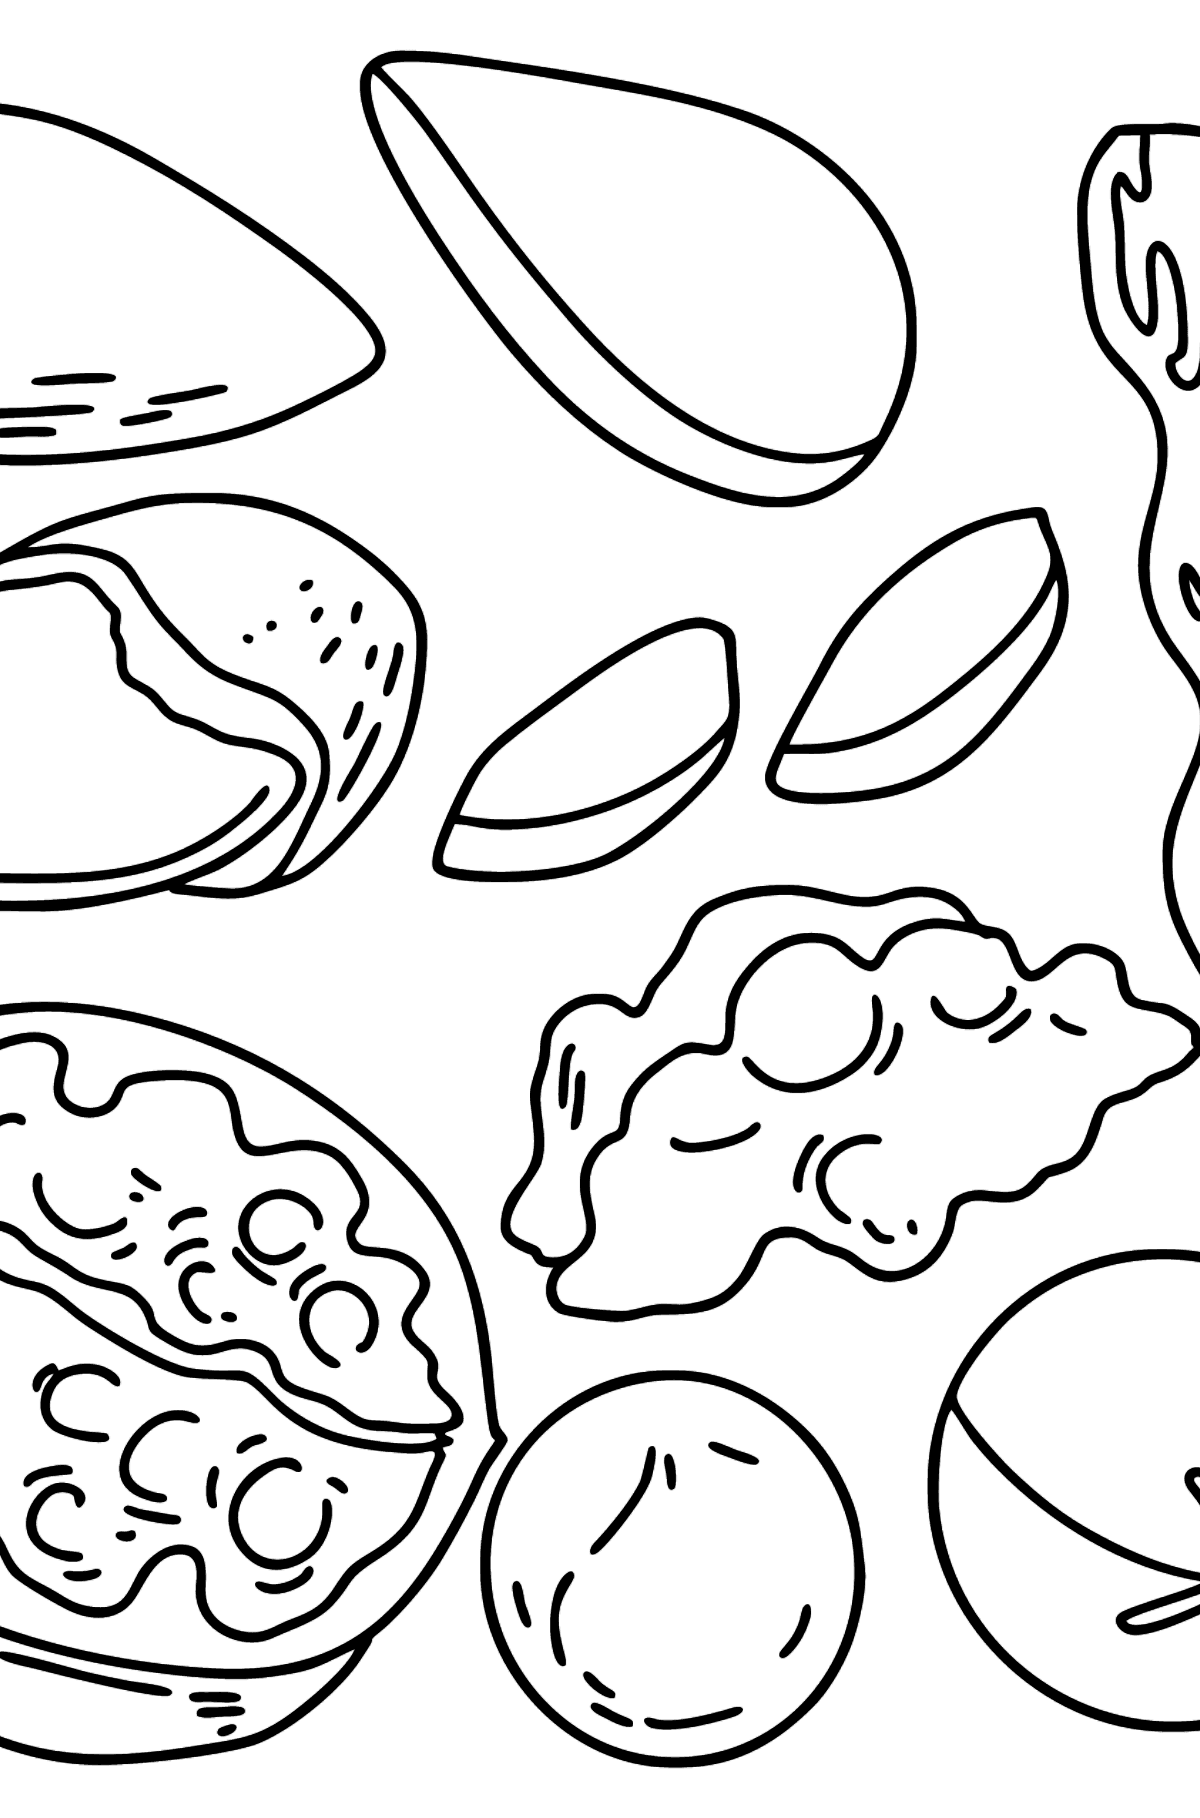 Nuts: Walnuts, Macadamia, Almonds and Peanuts coloring page - Coloring Pages for Kids